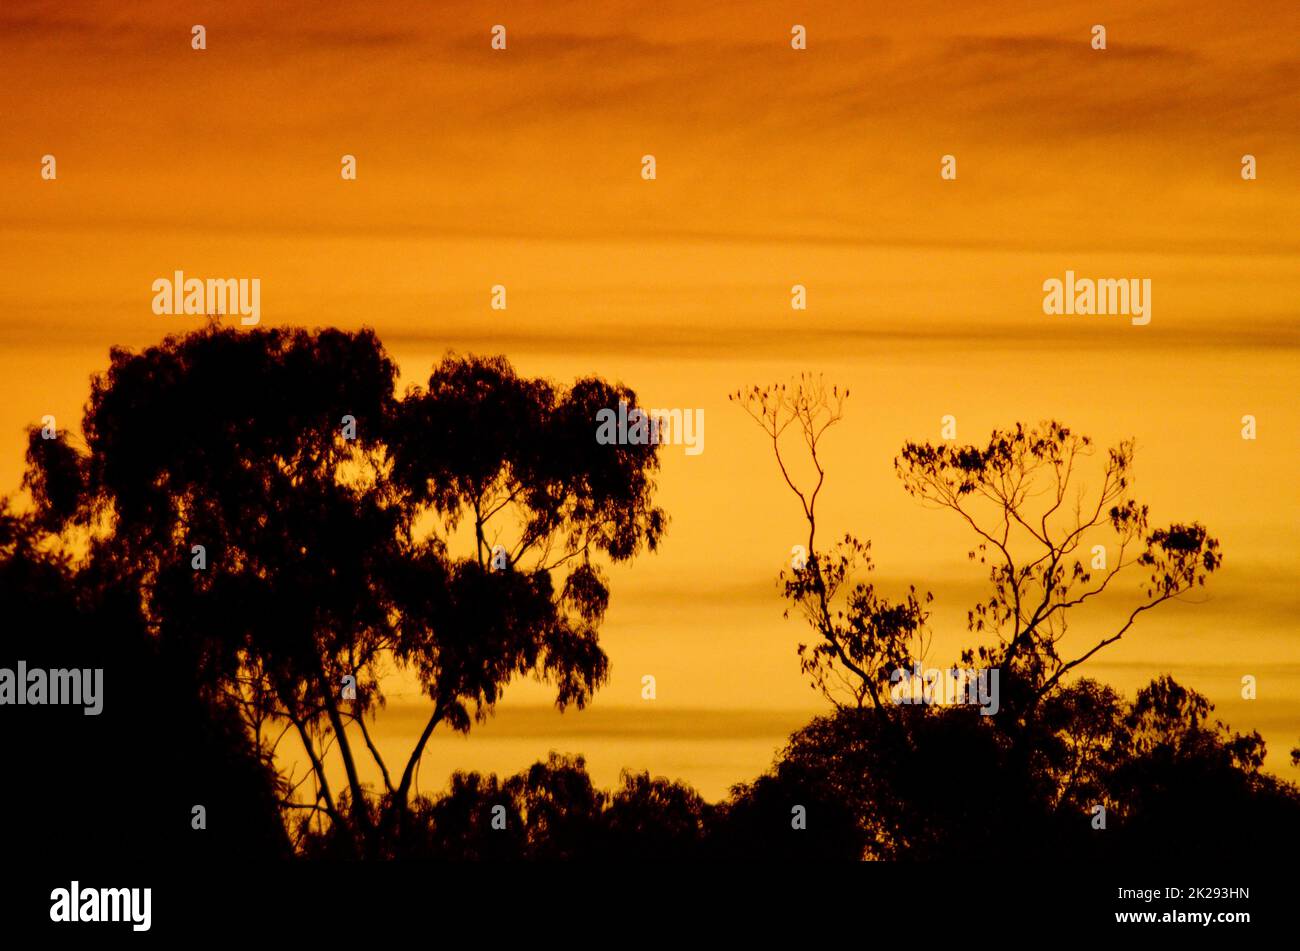 Trees in the Blue Mountains of Australia silhouetted by an orange sunrise Stock Photo